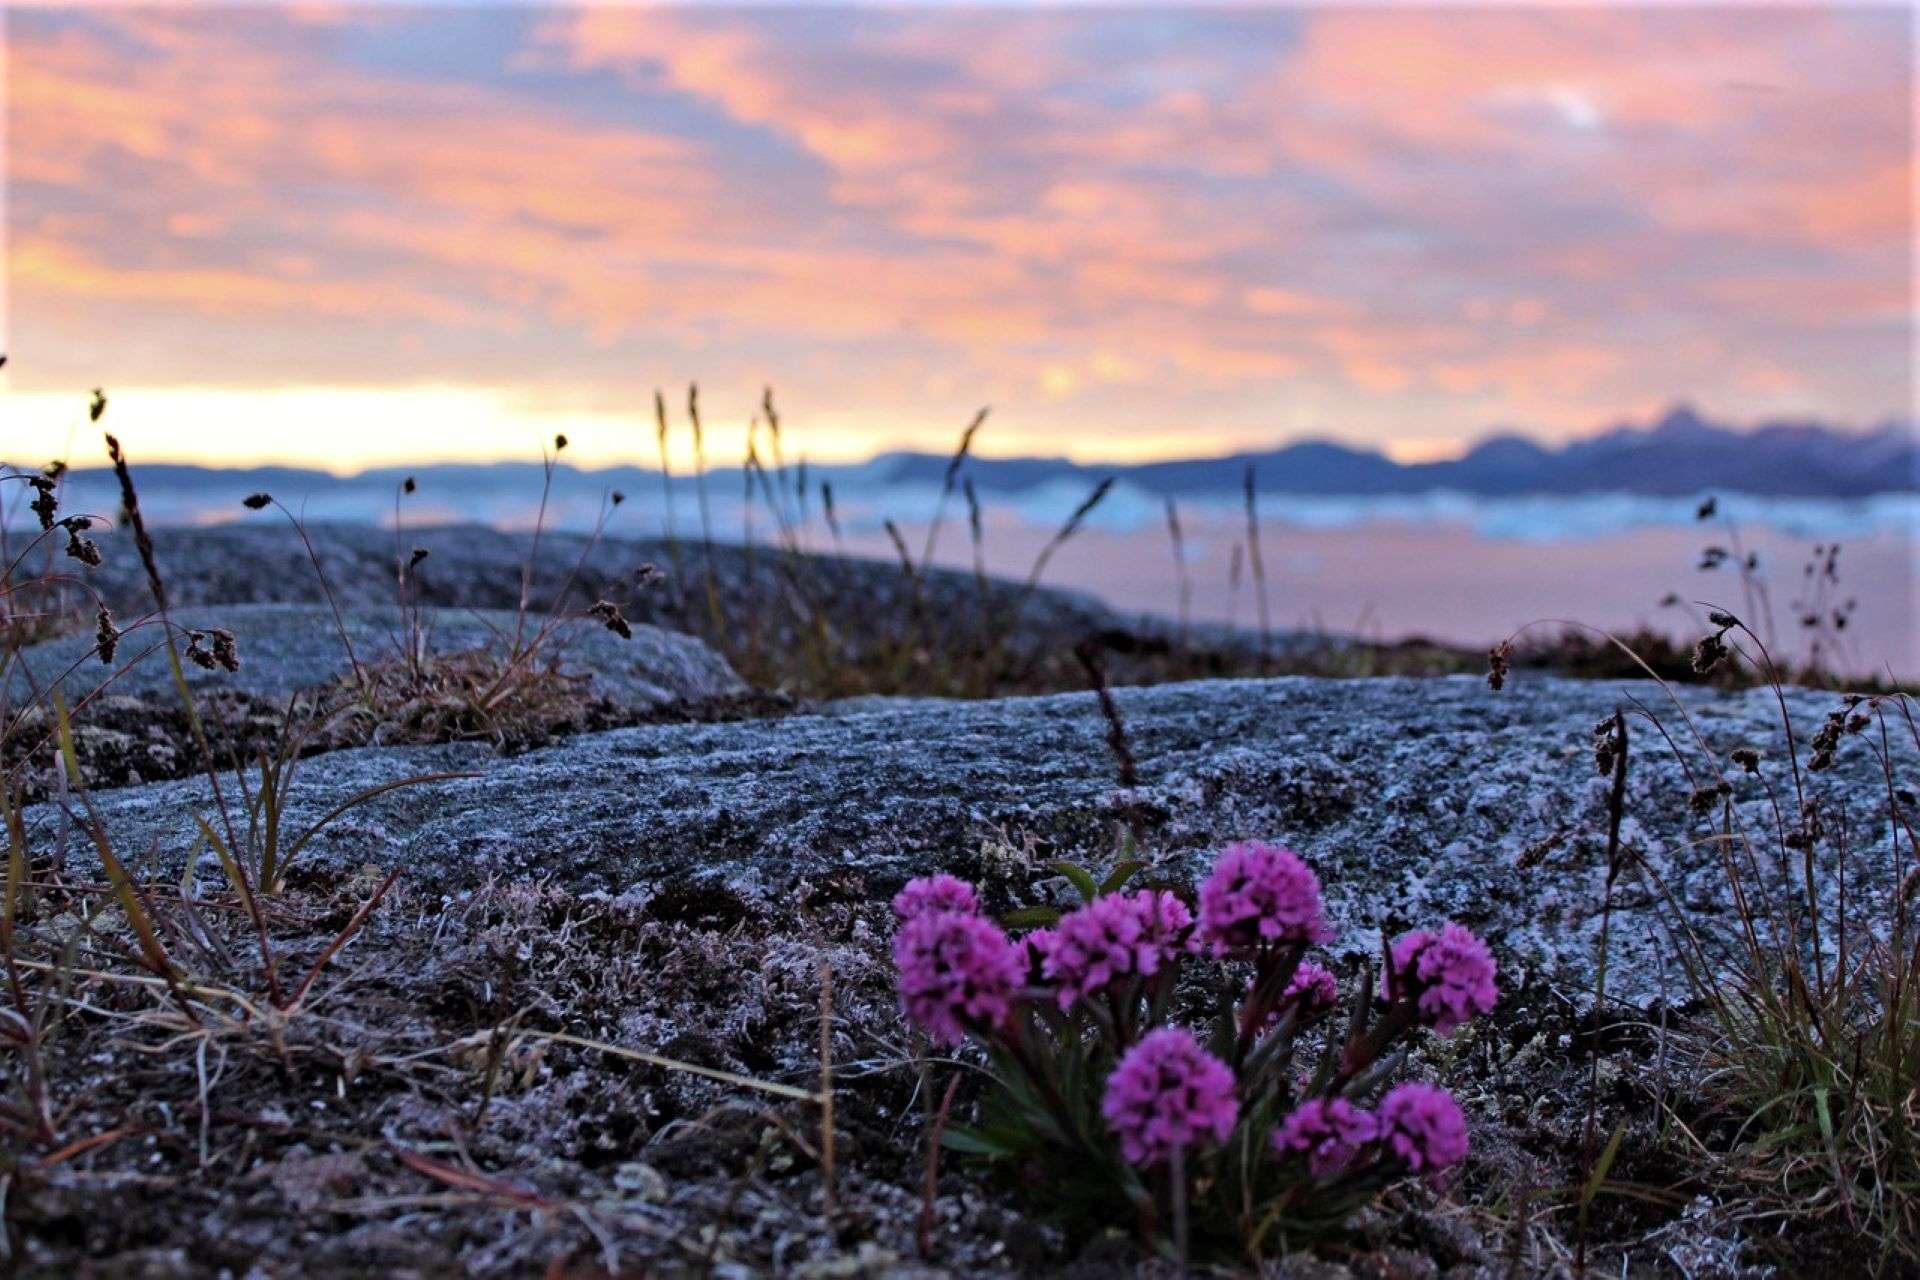 Arctic wild flowers on a rock with a horizon view of a sunset.